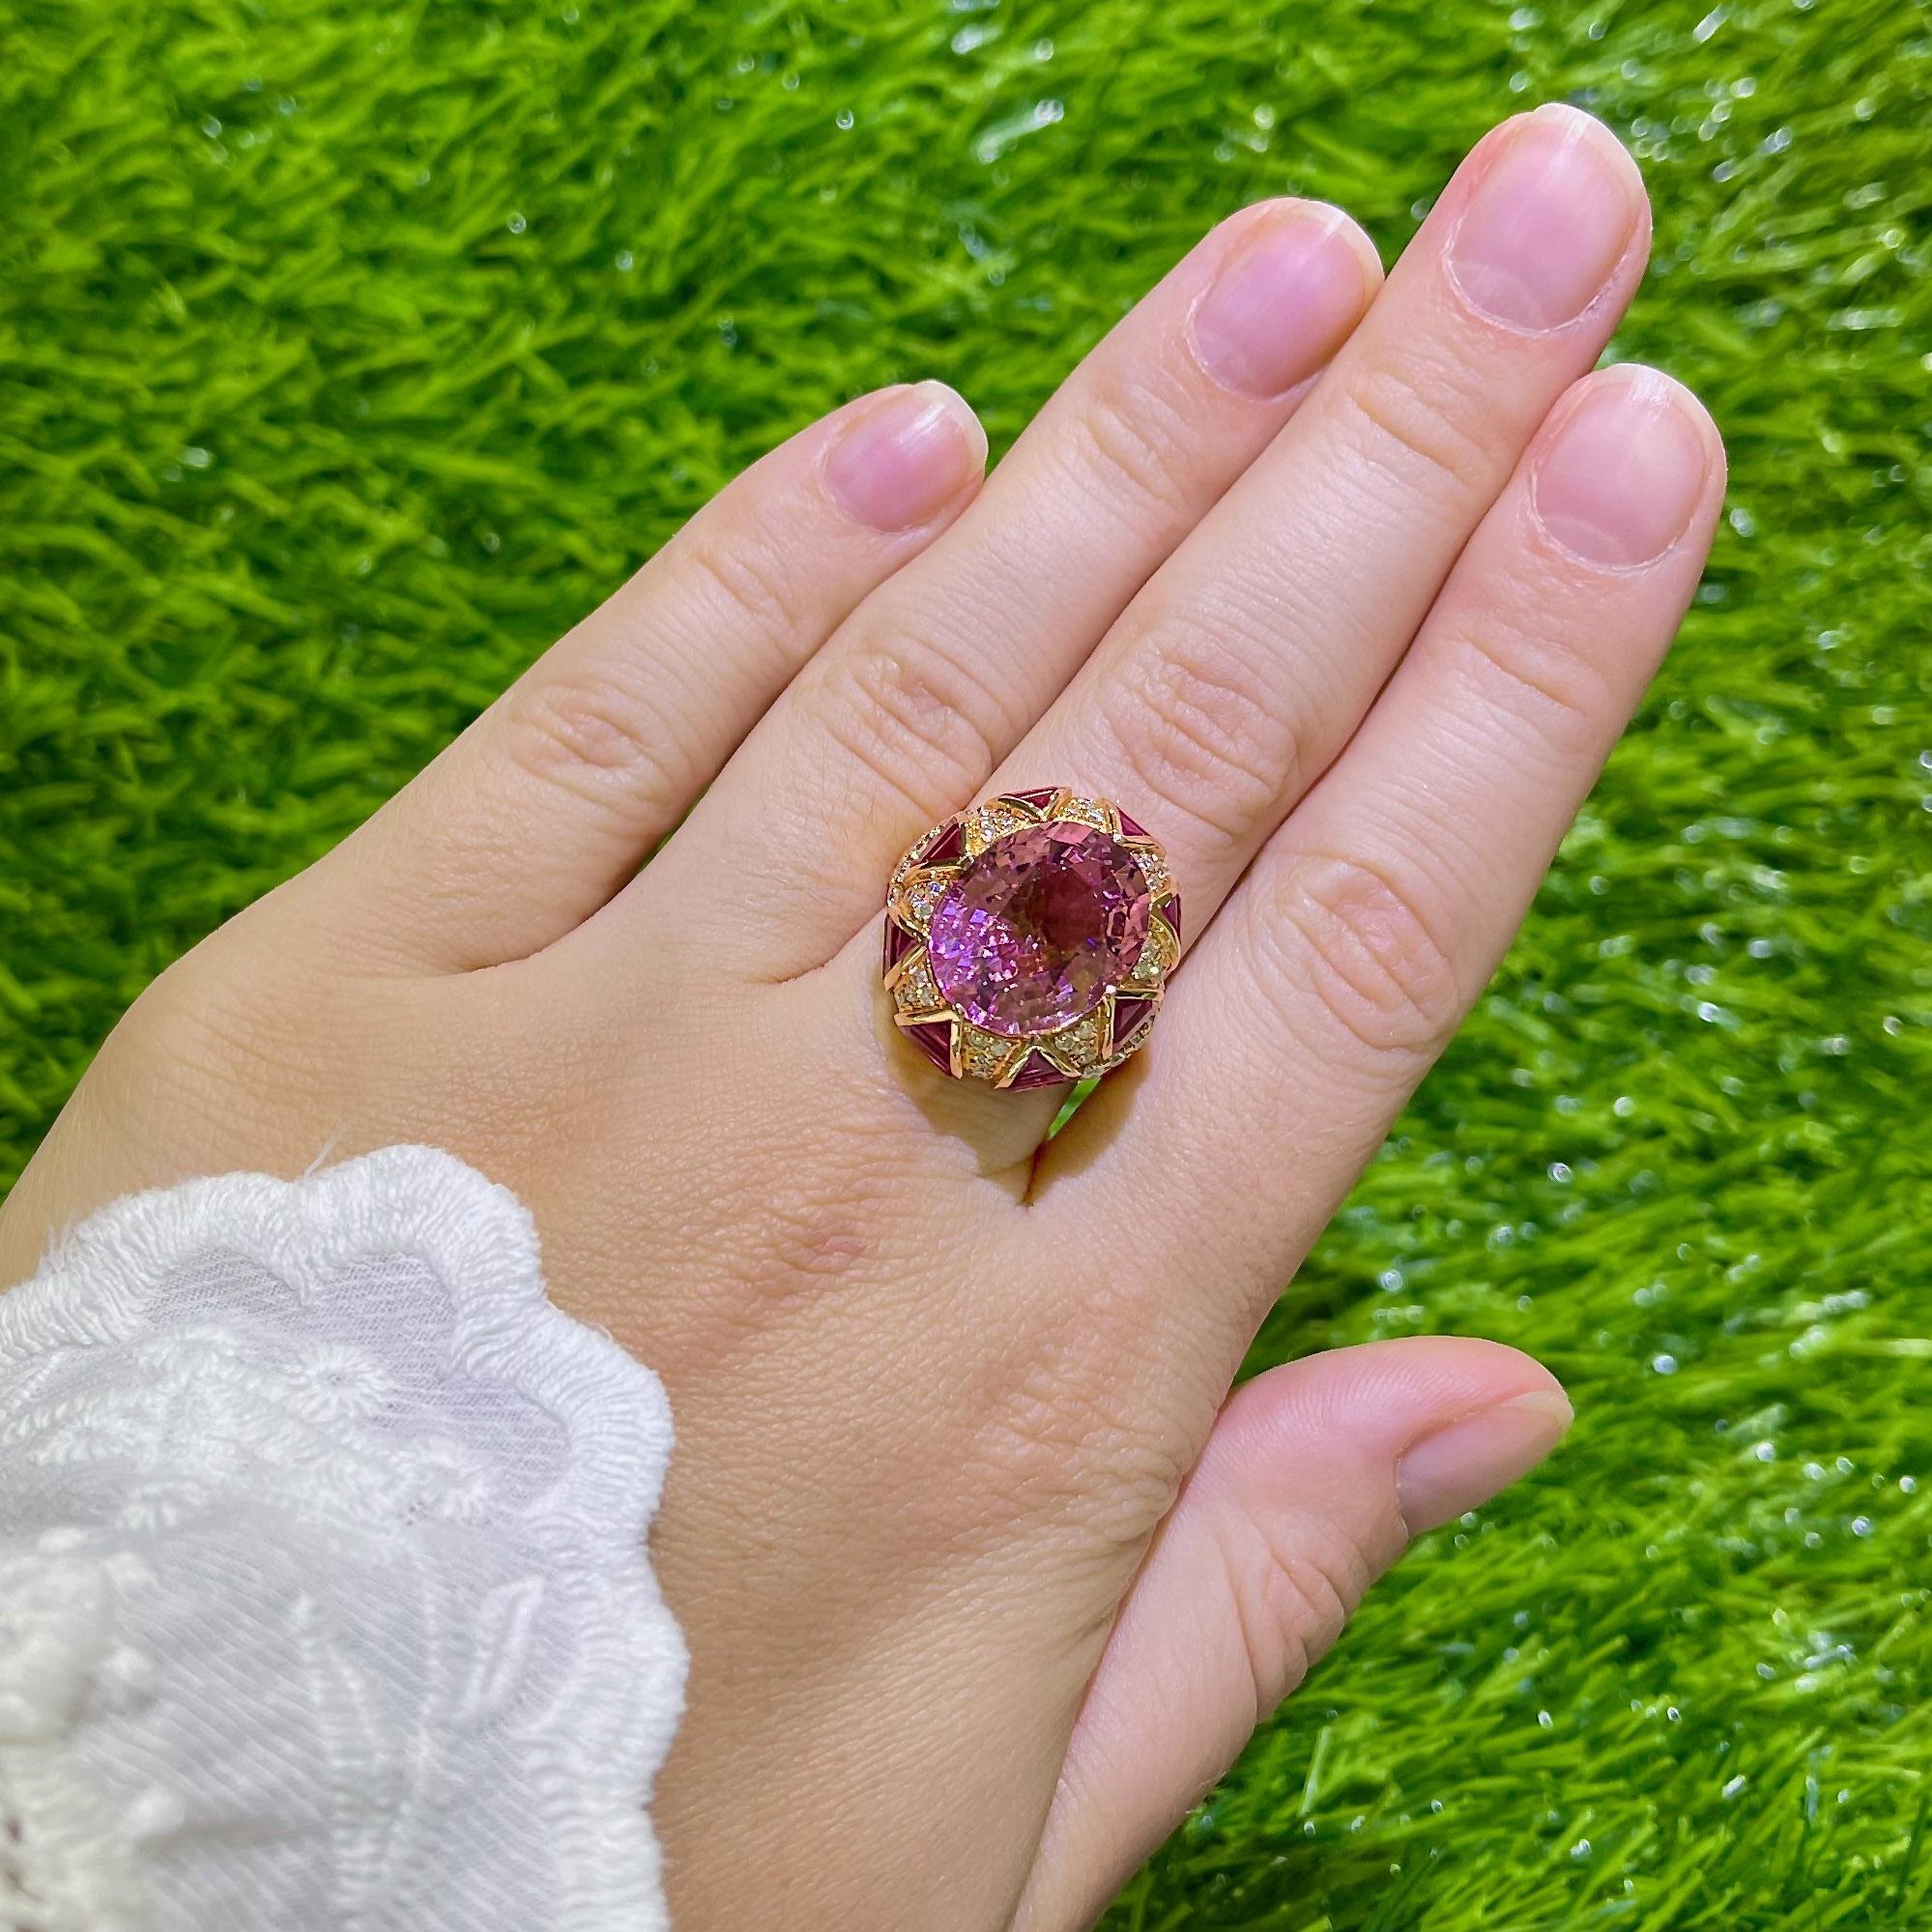 Beautiful Topaz Cocktail Ring Set With Rubies and Diamonds. It comes with the appraisal by GIA G.G.
Topaz = 10.2 Carat
Total Carat Weight of Rubies is 4.45 Carats
Total Carat Weight of Diamonds is 0.74 Carats
Diamonds Color is G
Diamonds Clarity is